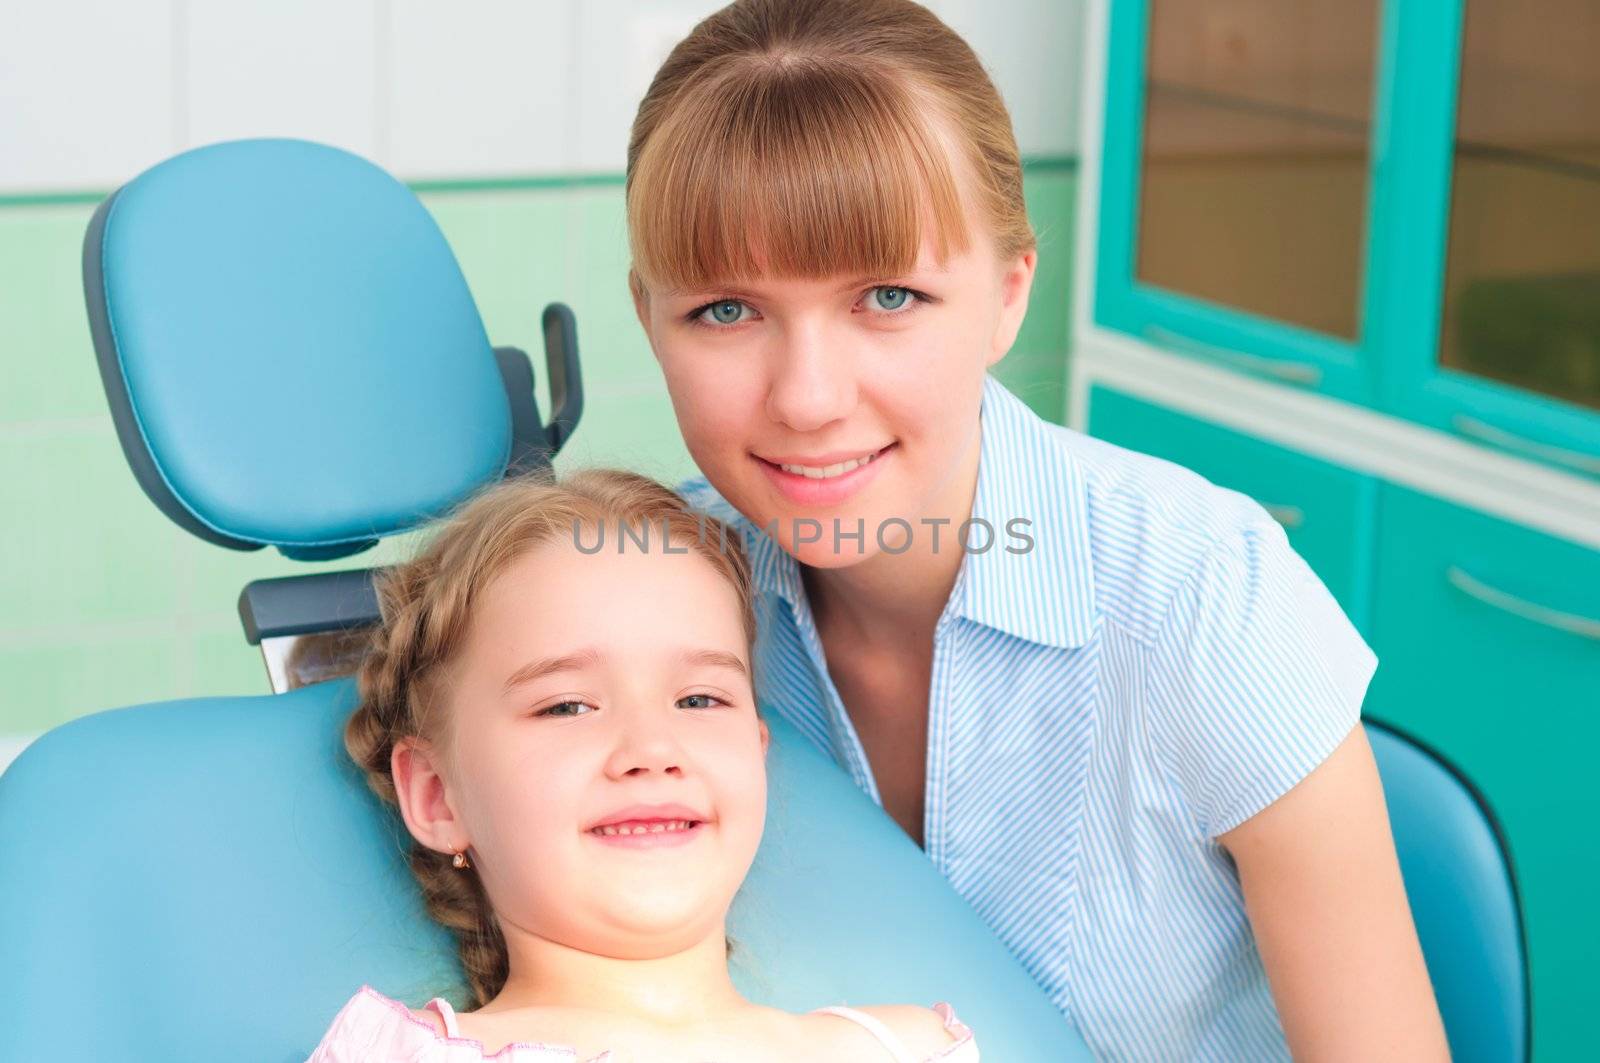 mother and daughter visit the dentist, the child is sitting in the dental chair and mother near